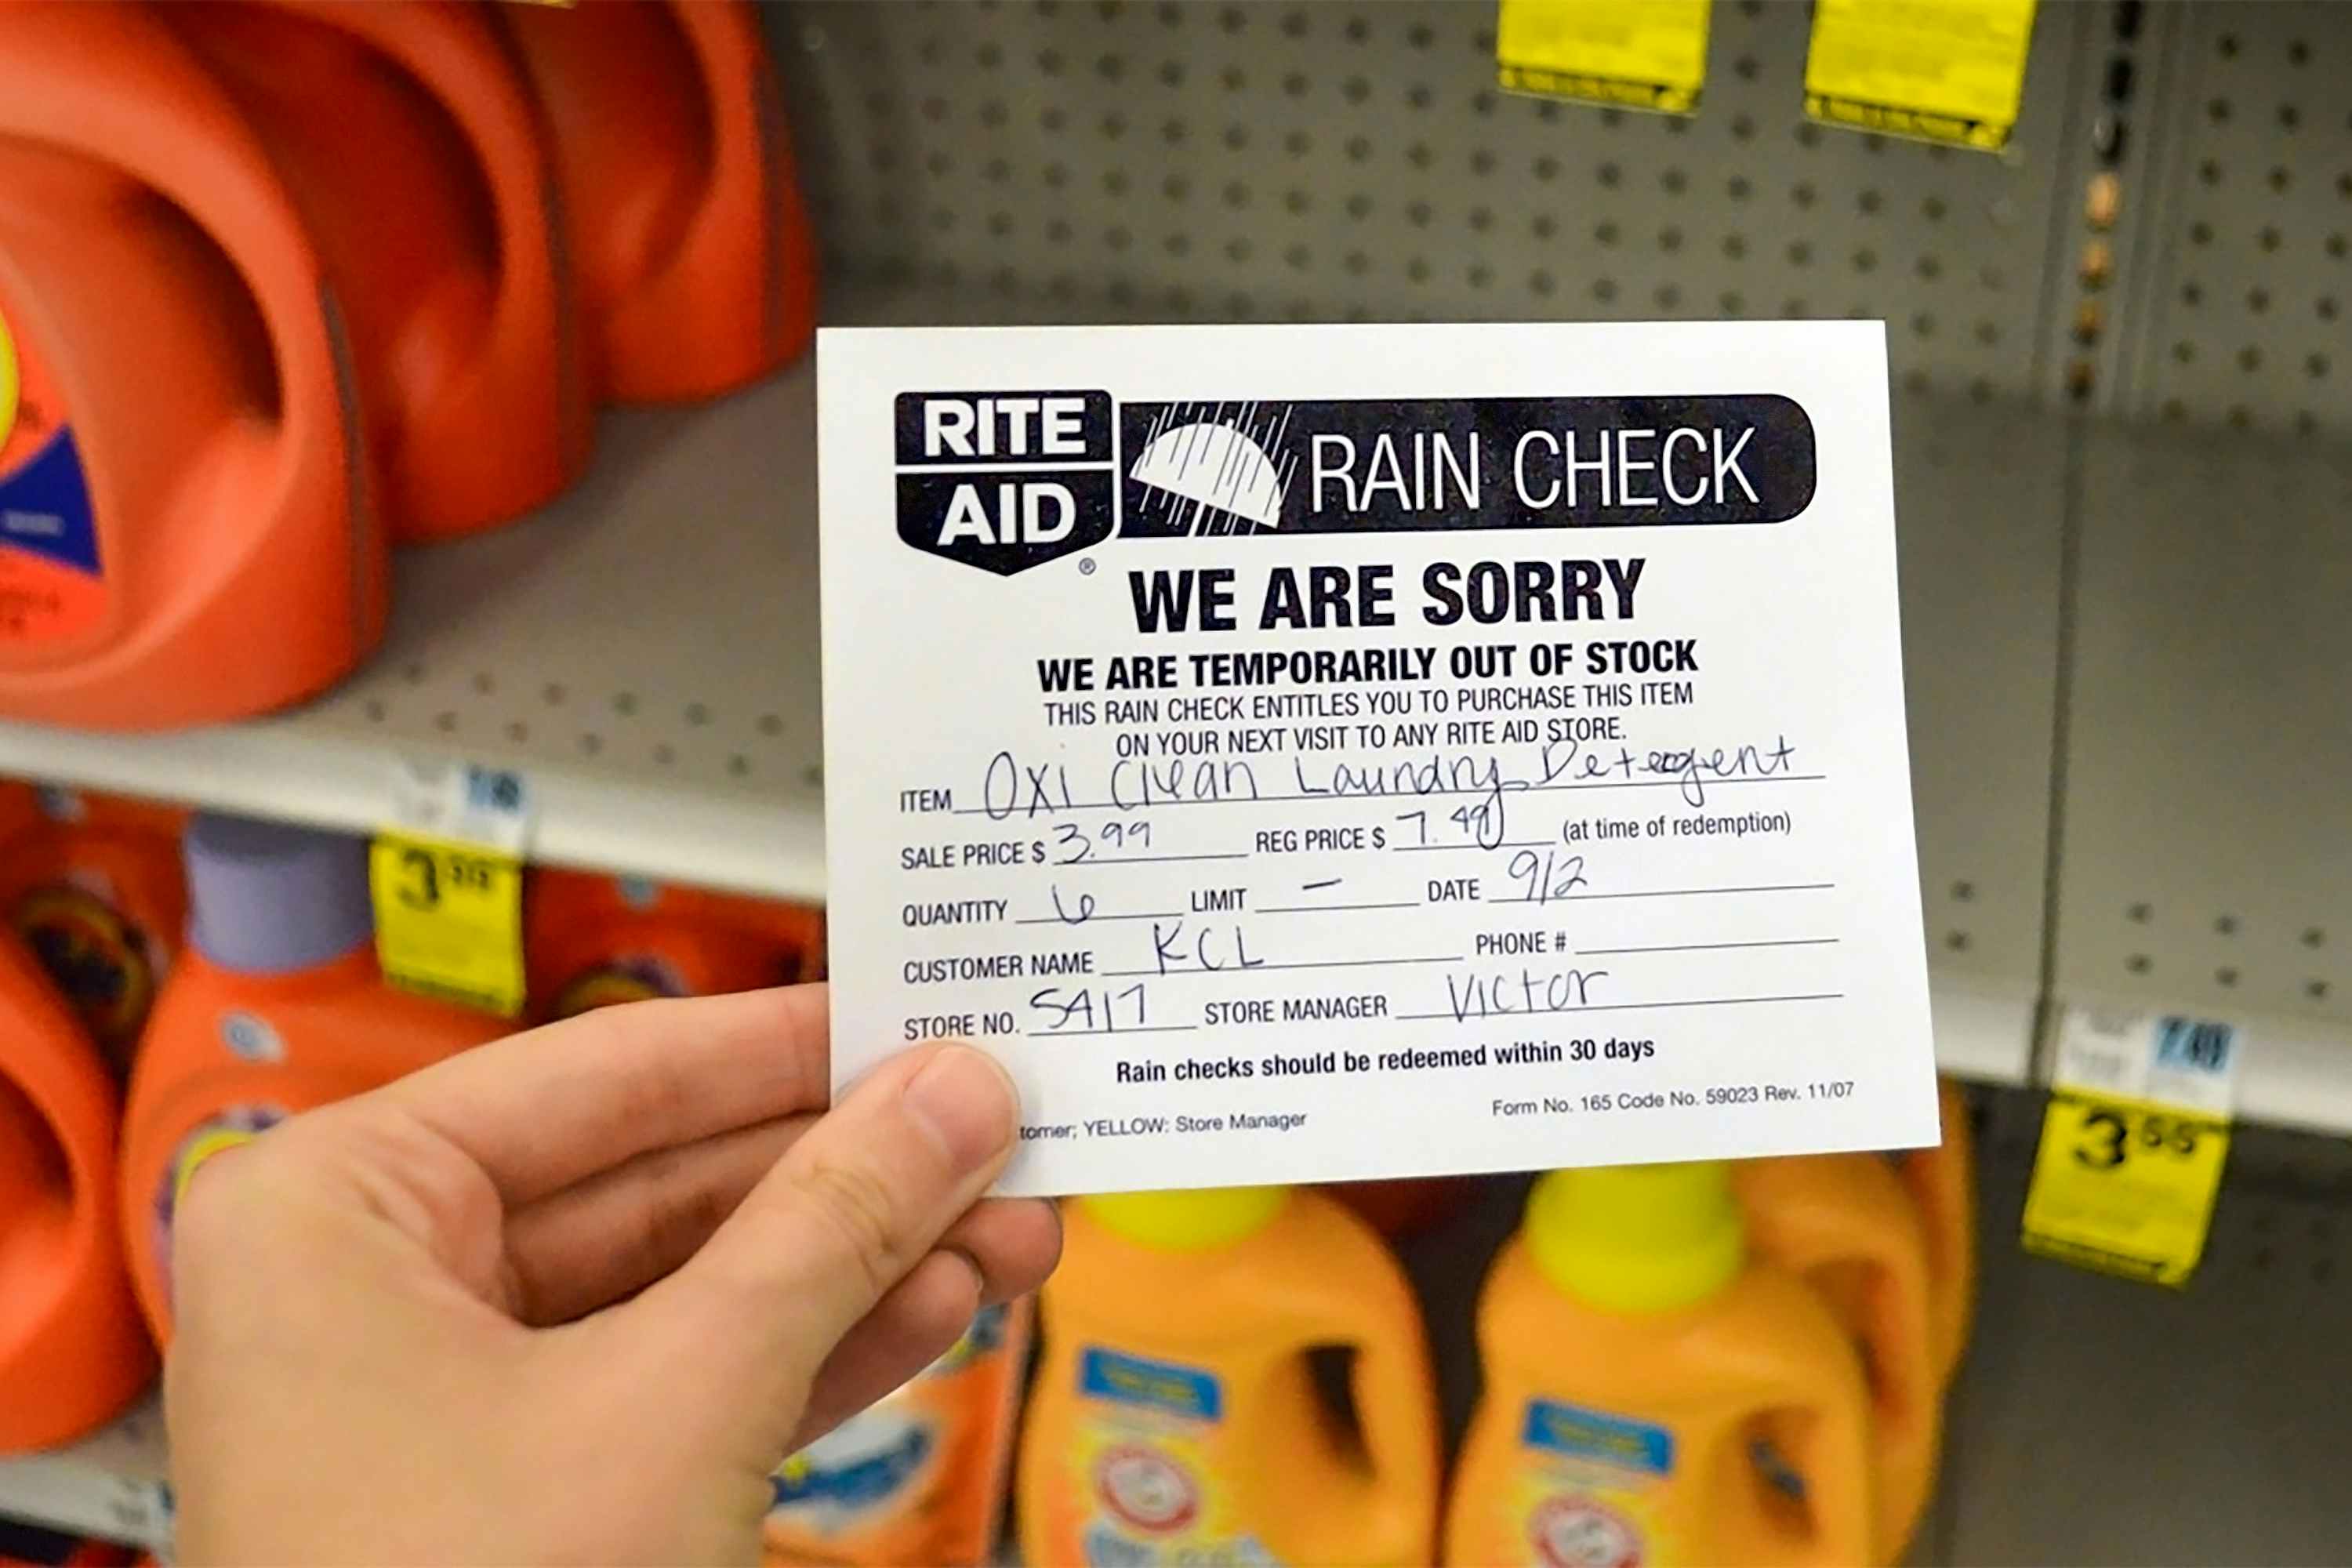 rite-aid-rain-check-slip-out-of-stock-sale-item-kcl